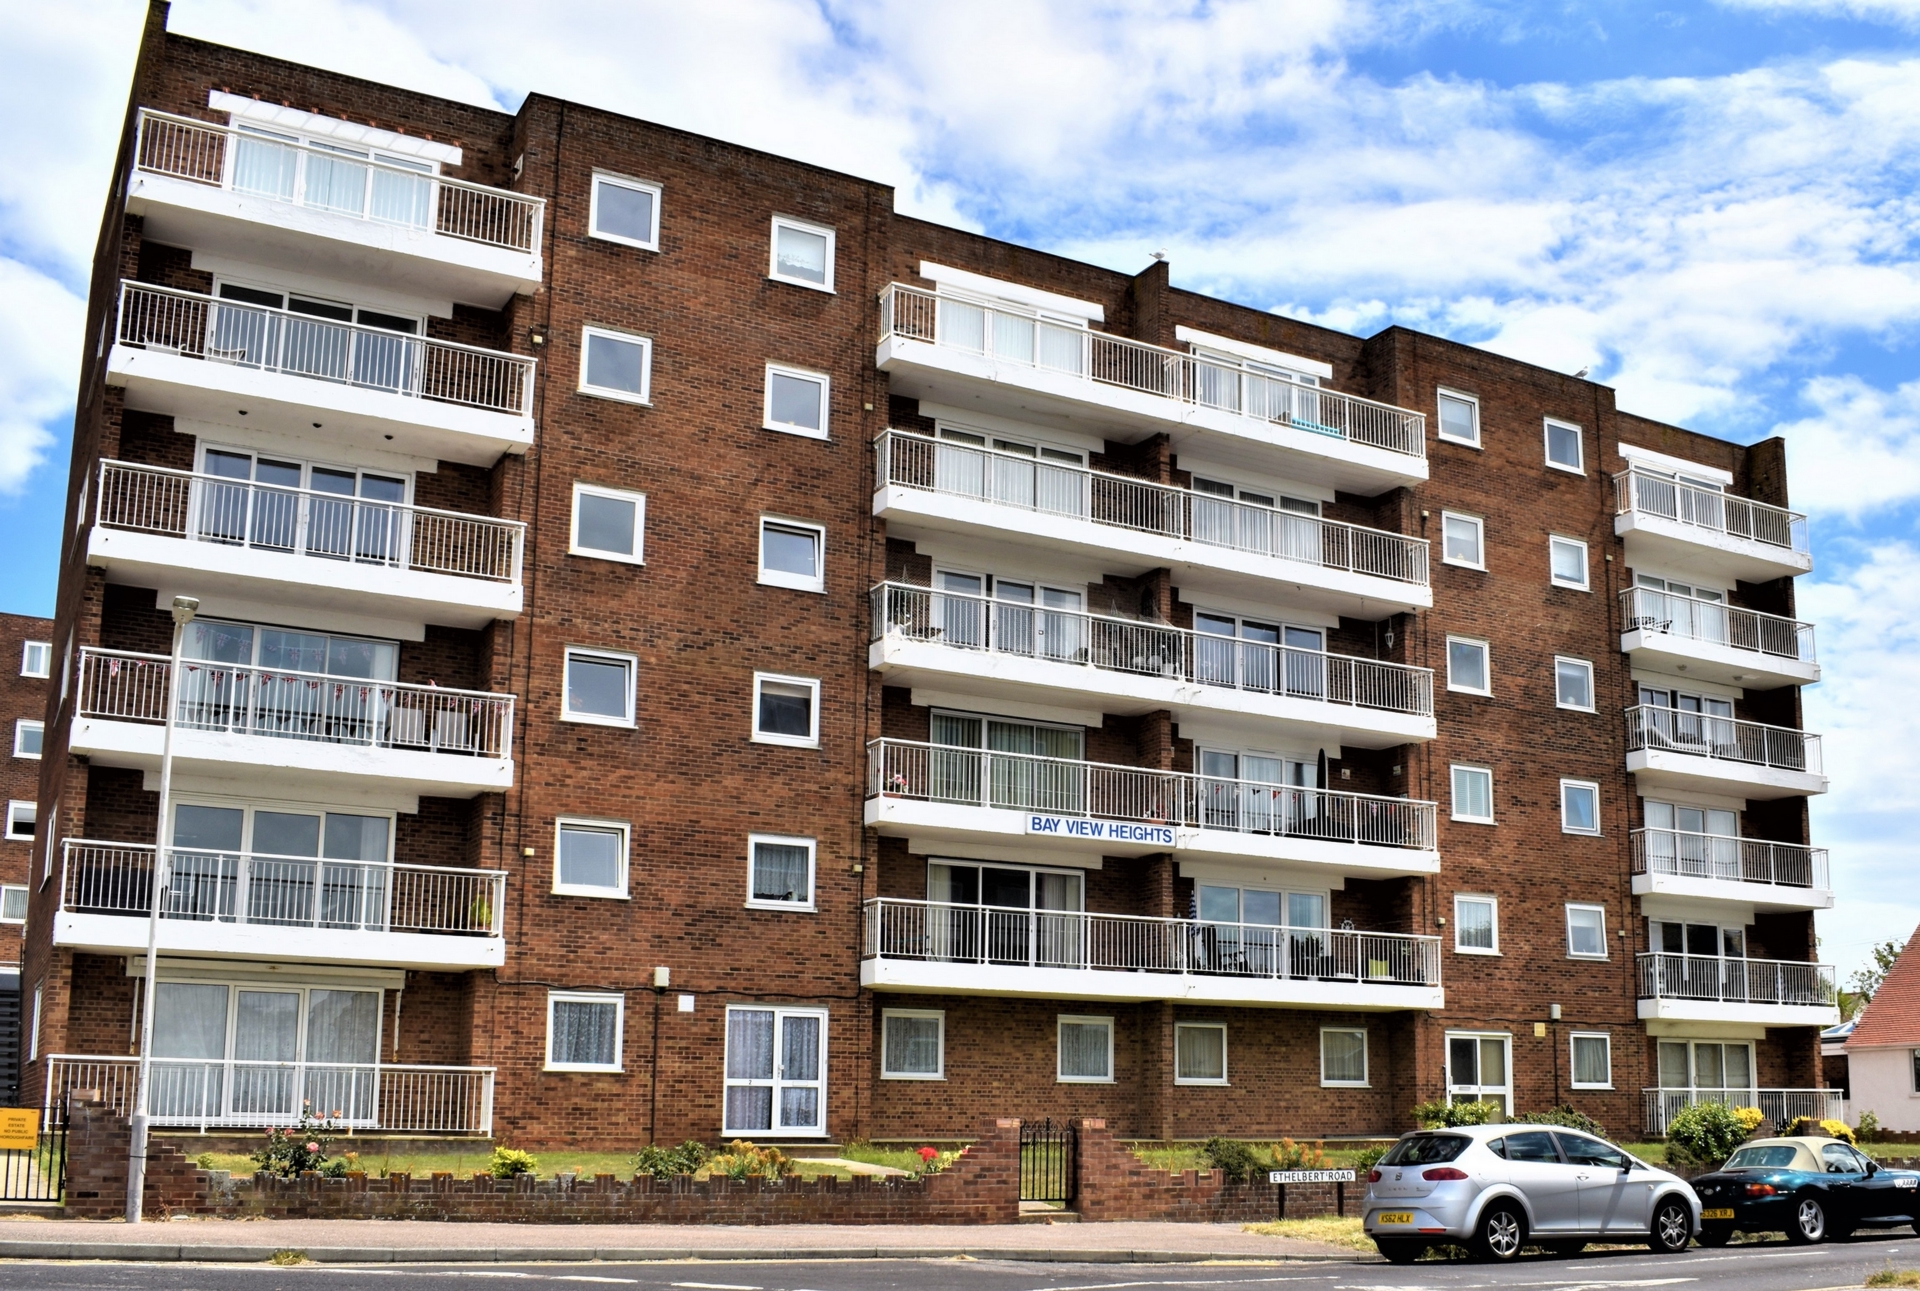 2 Bedroom Balcony flat with stunning sea views, double bedrooms, good size lounge and parking.    Service charge: £1800 per year   The lease has been extended by a deed dated 12th May 2005 to a period of 999 years from 1974.